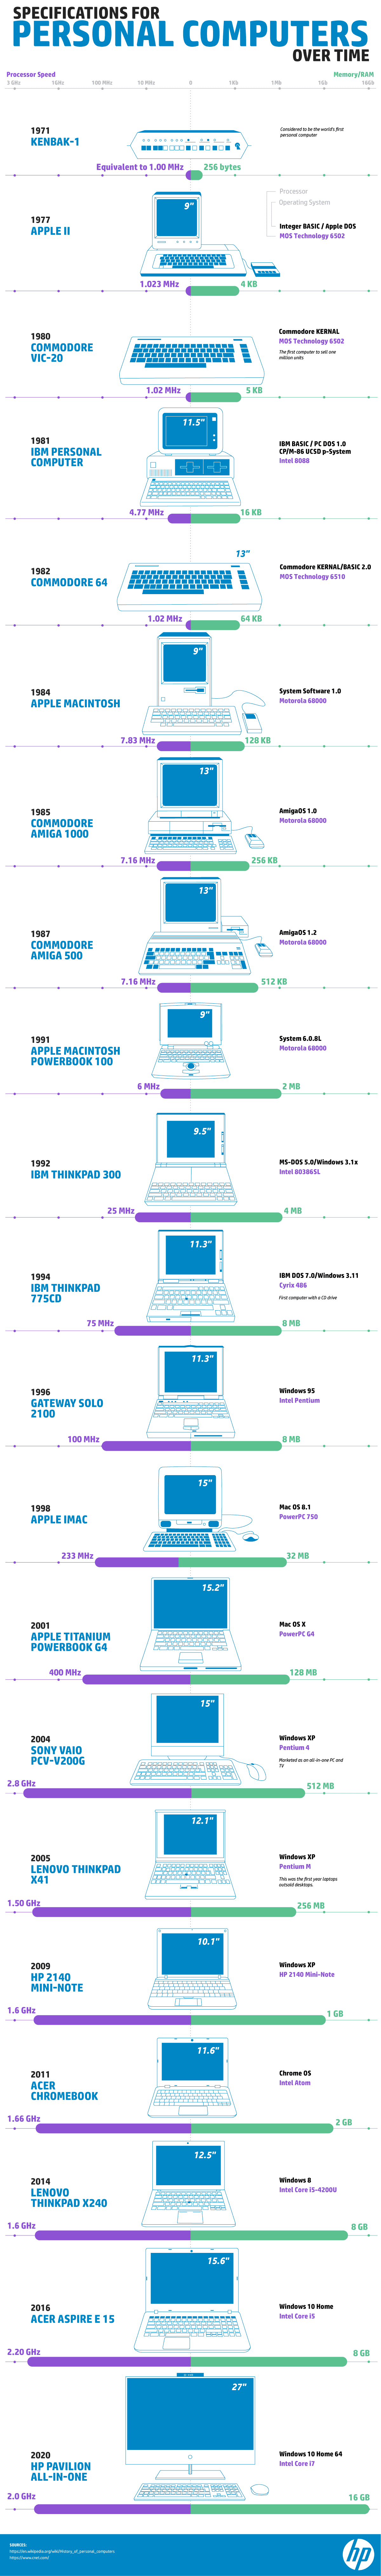 Specifications of Personal Computers Over Time by HP - Infographic